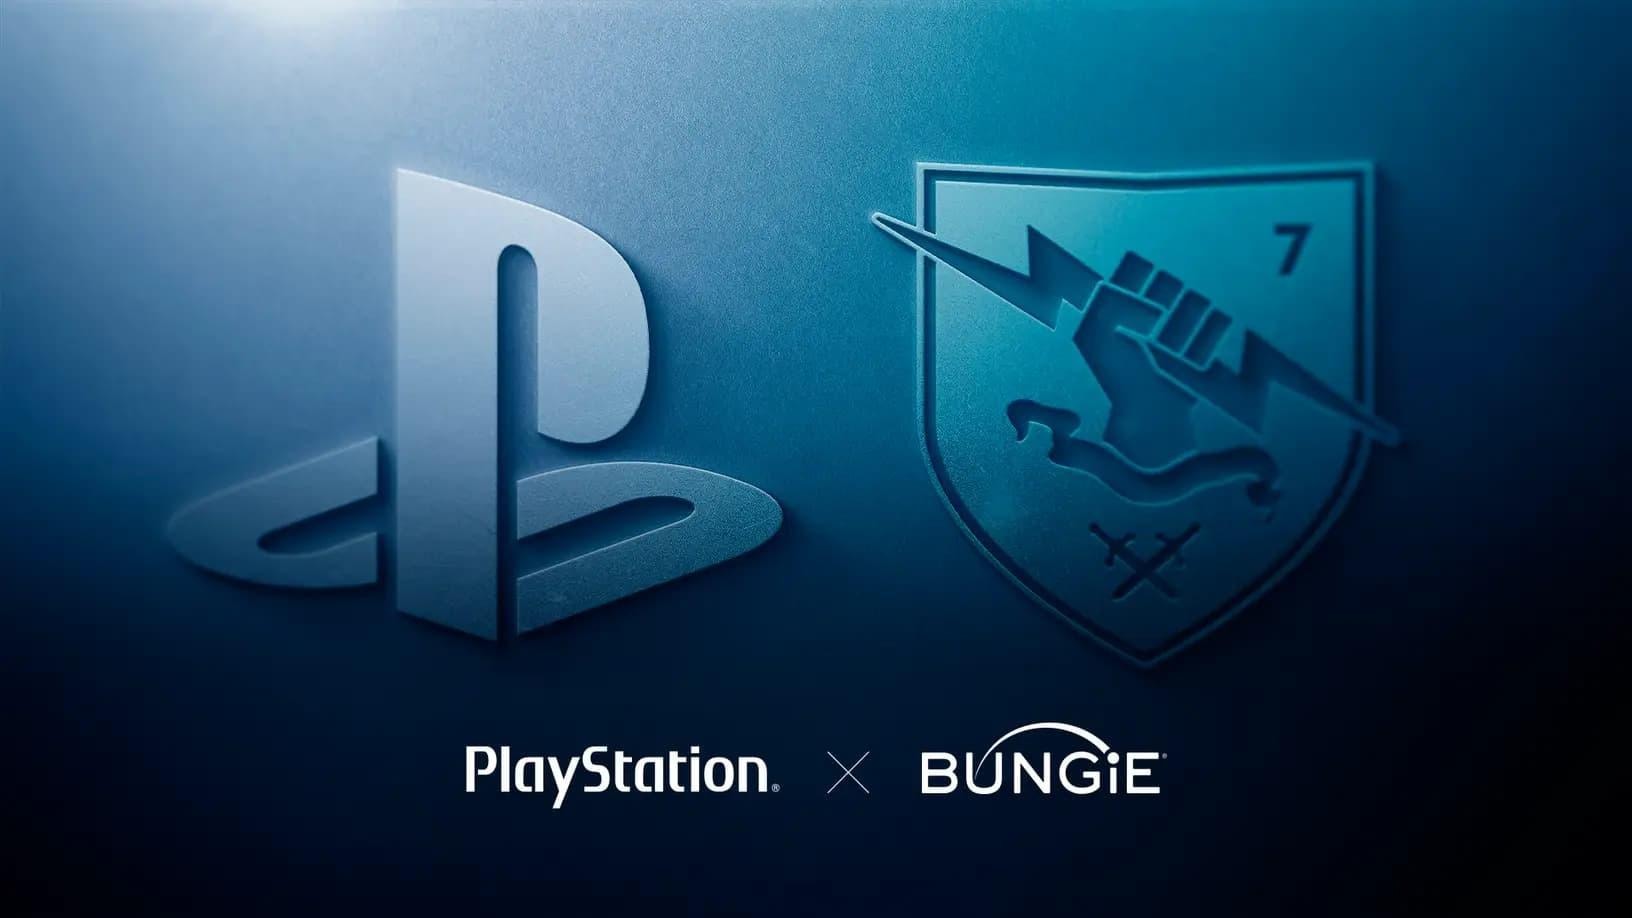 former-hr-manager-sues-bungie-alleges-wrongful-termination